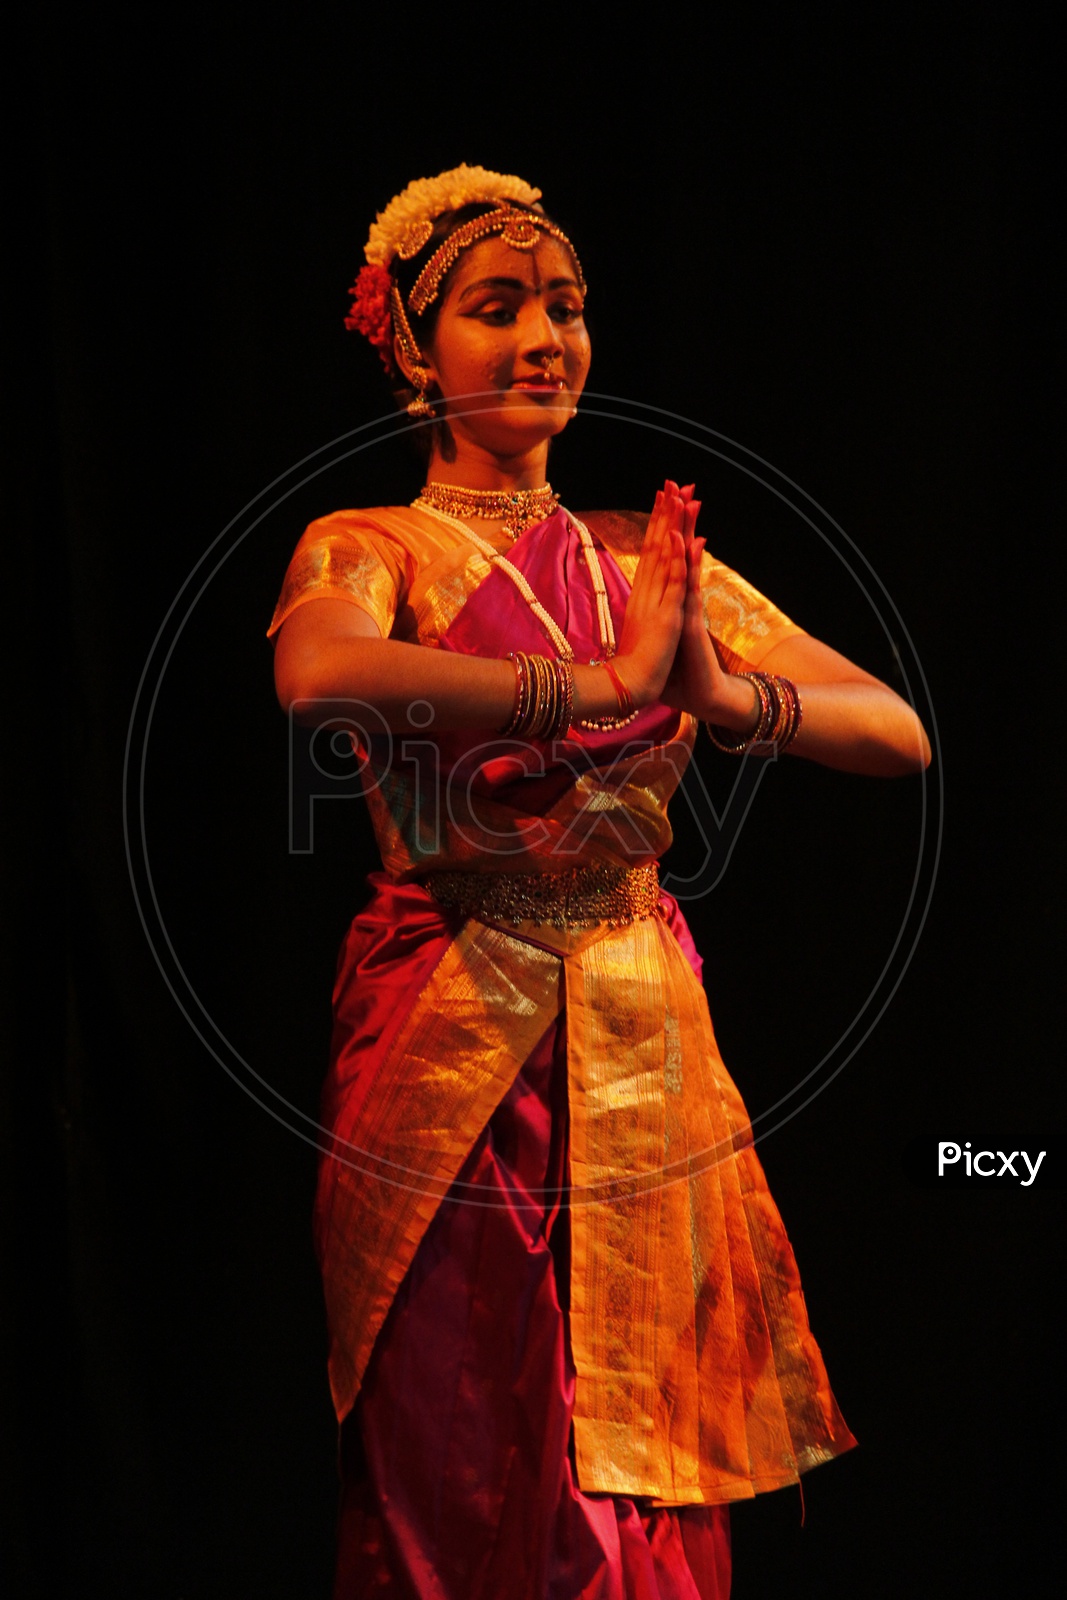 Indian Classical Dancers Performing a Classic Dance Art form